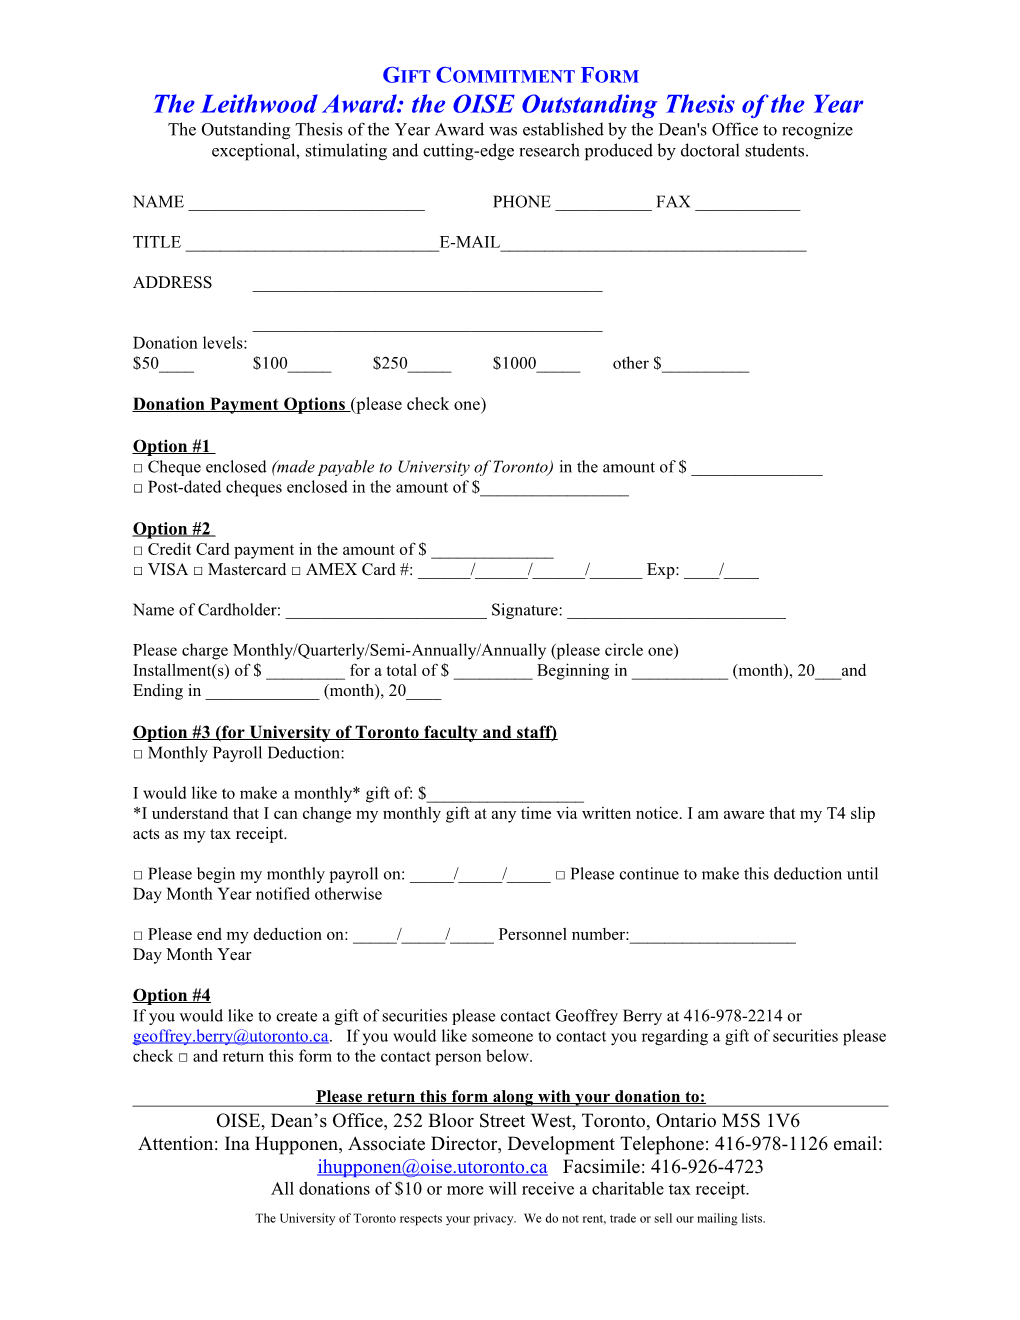 Gift Commitment Form